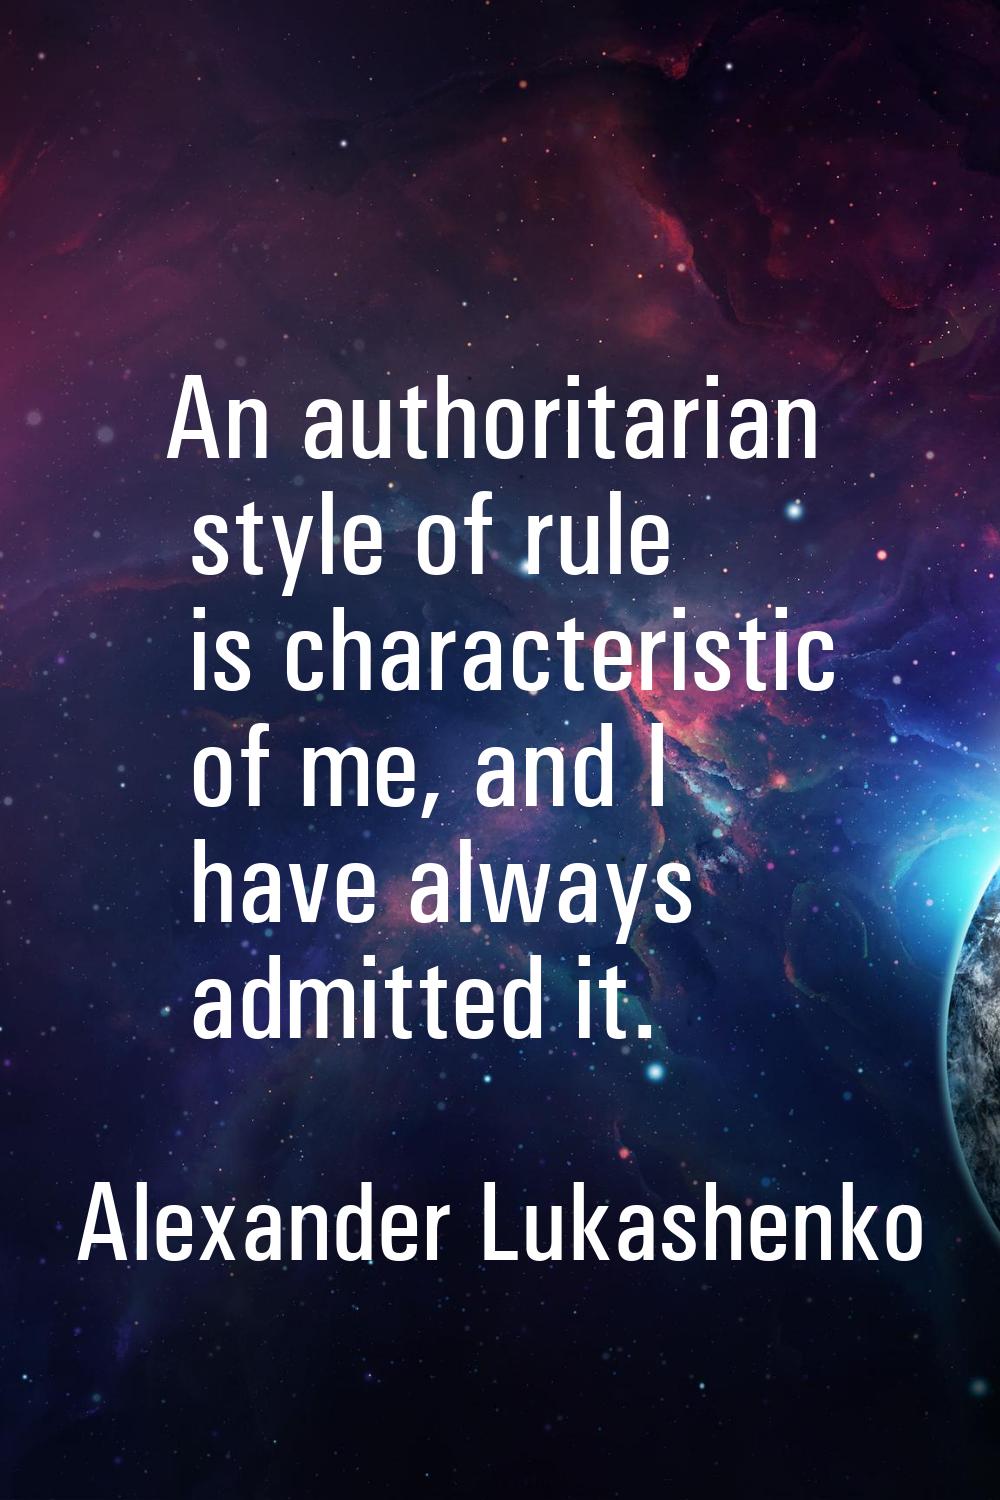 An authoritarian style of rule is characteristic of me, and I have always admitted it.